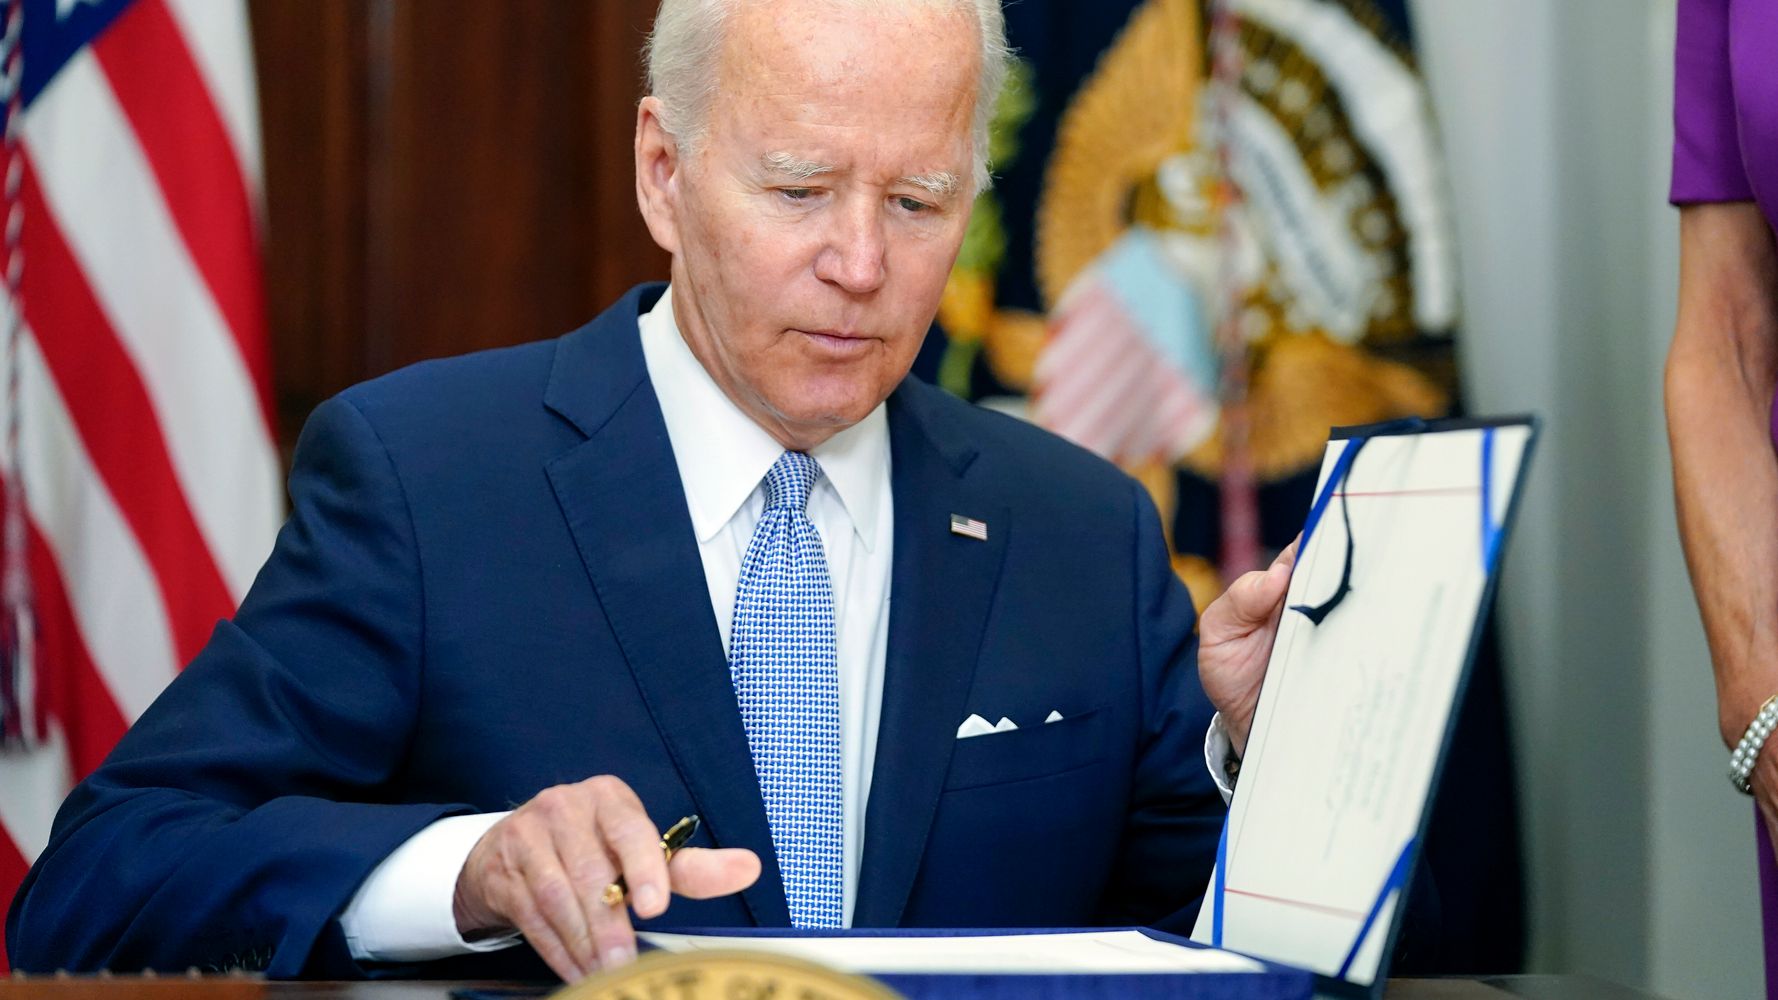 Biden celebration of the new gun law overshadowed by recent footage